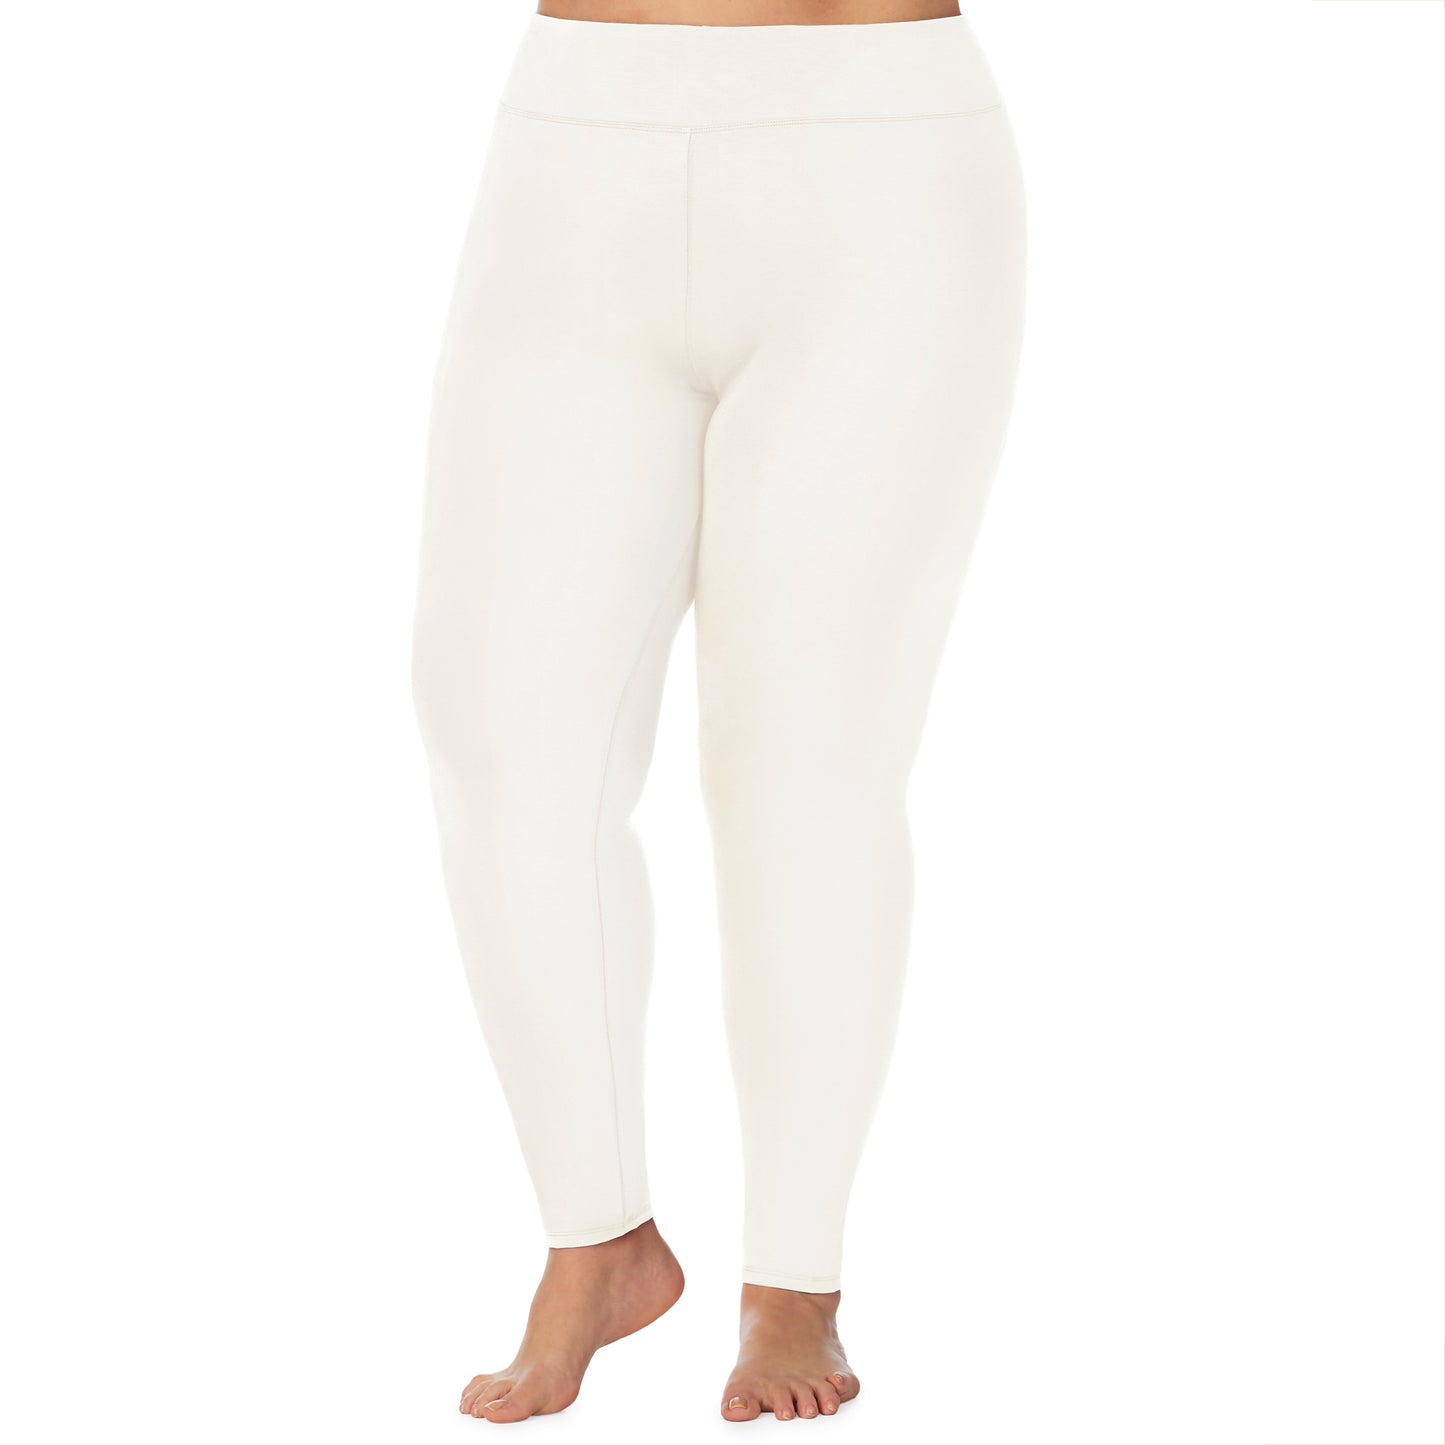 Ivory; Model is wearing size 1X. She is 5'9", Bust 38", Waist 36", Hips 48.5". @A lady wearing a ivory high waist legging plus.